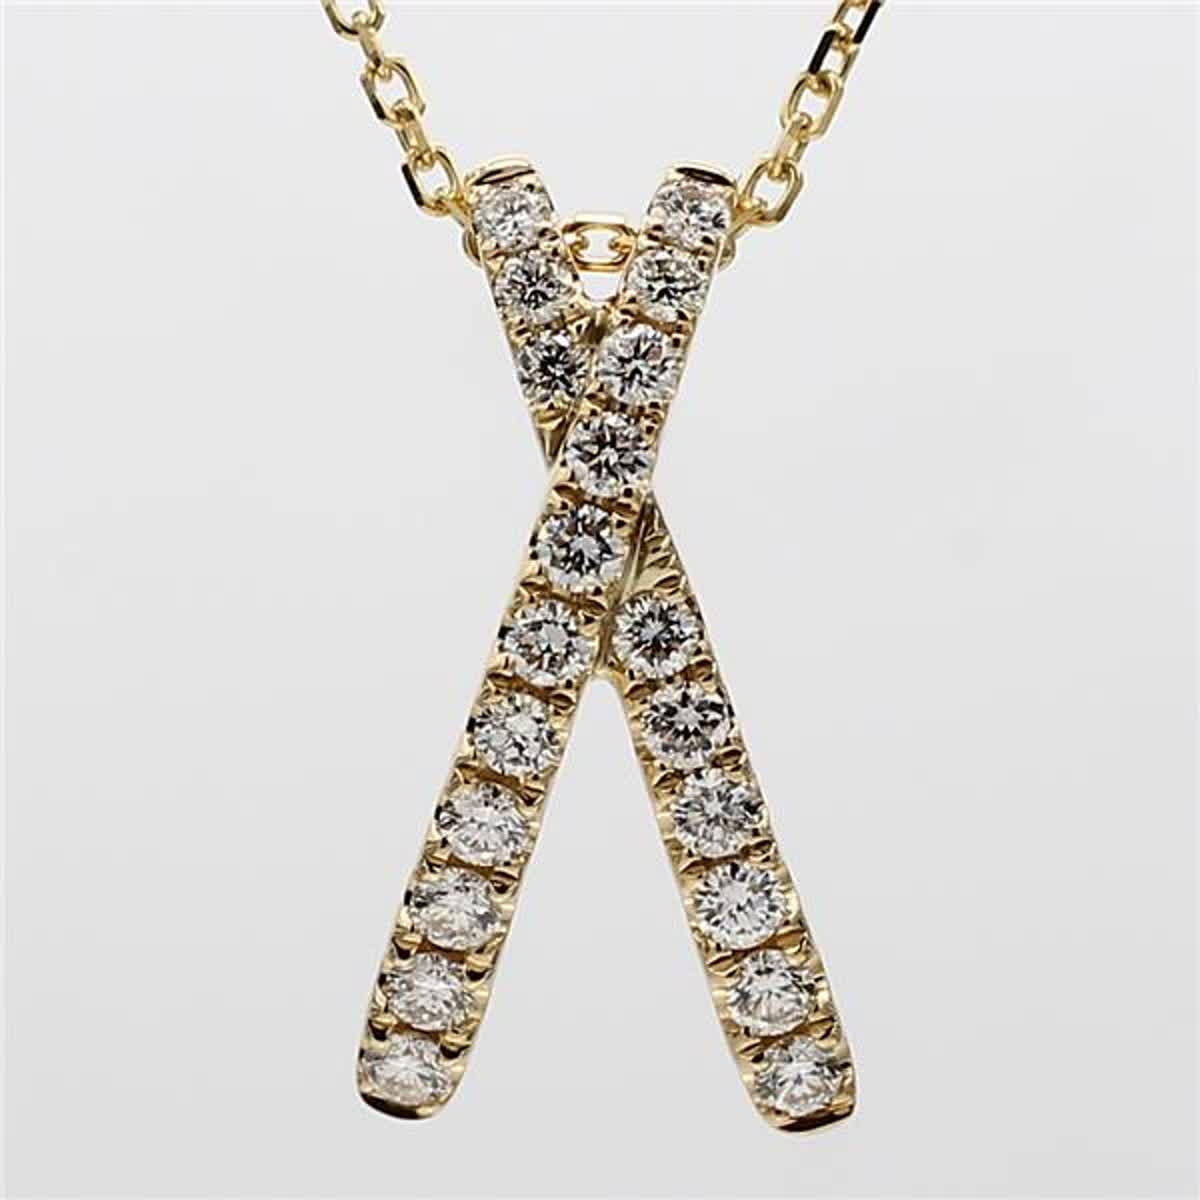 RareGemWorld's classic diamond pendant. Mounted in a beautiful 14K Yellow and White Gold setting with natural round white diamond melee. This pendant is guaranteed to impress and enhance your personal collection.

Total Weight: .55cts

Length x